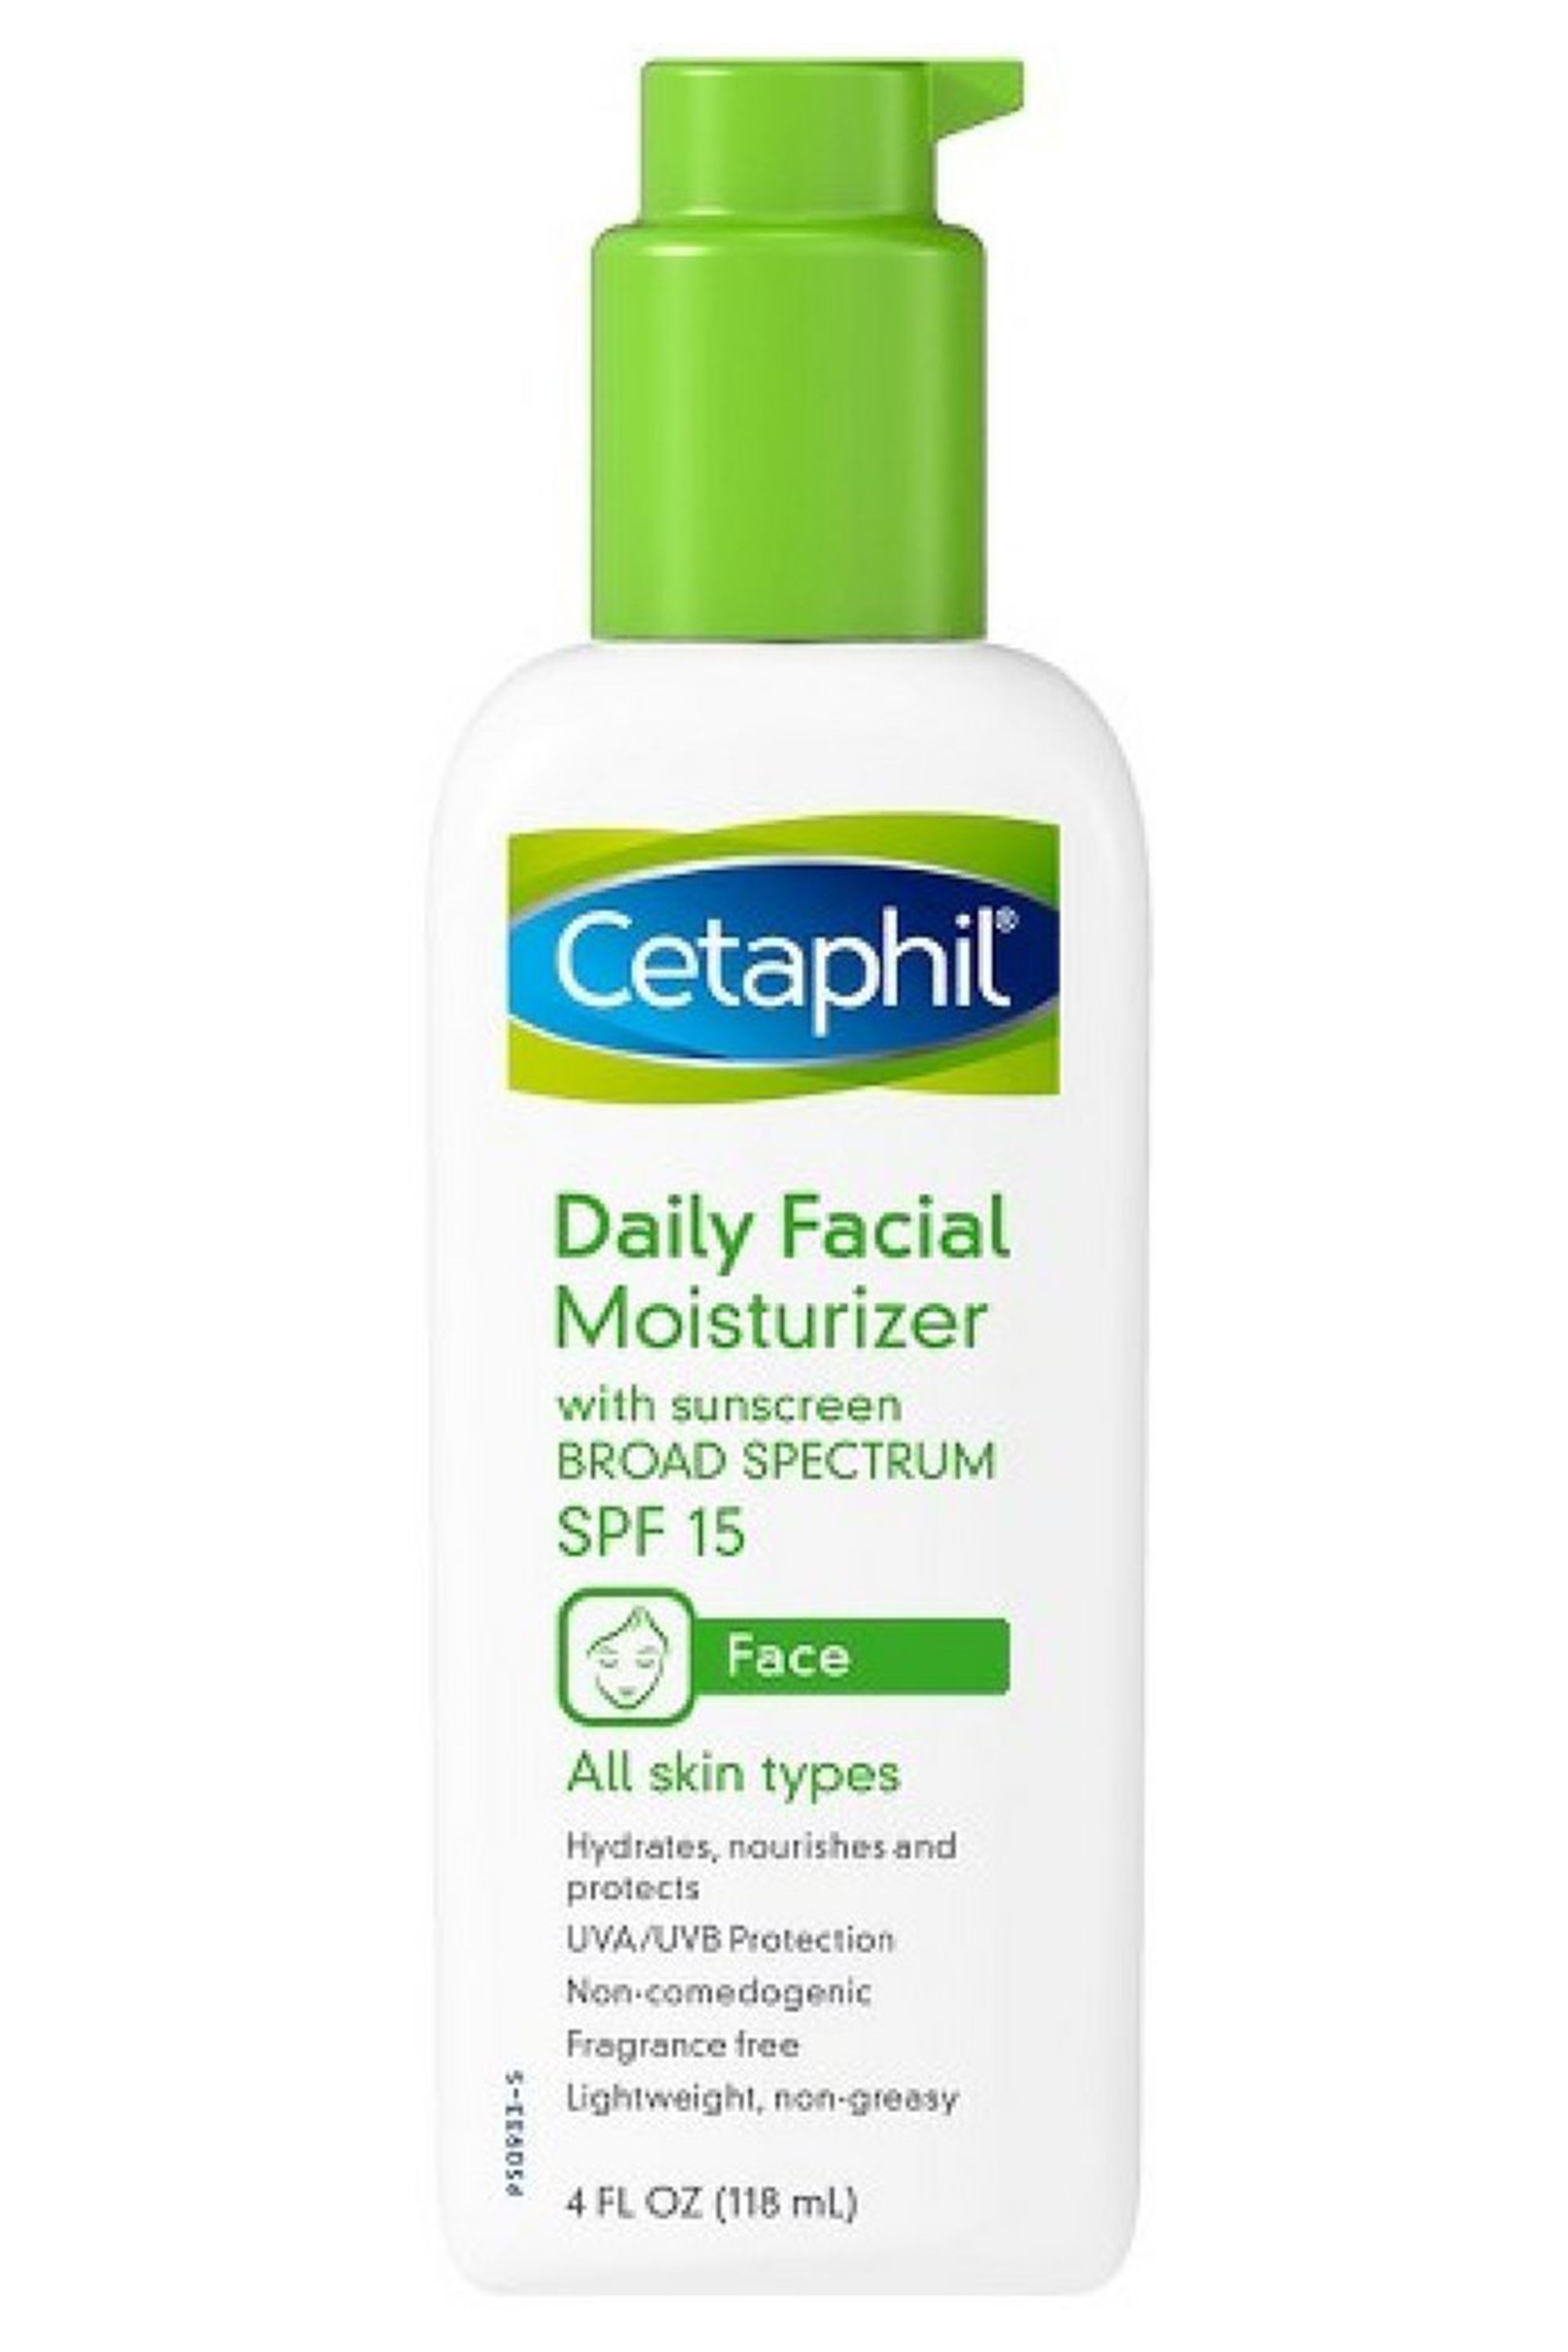 what's the best face moisturizer